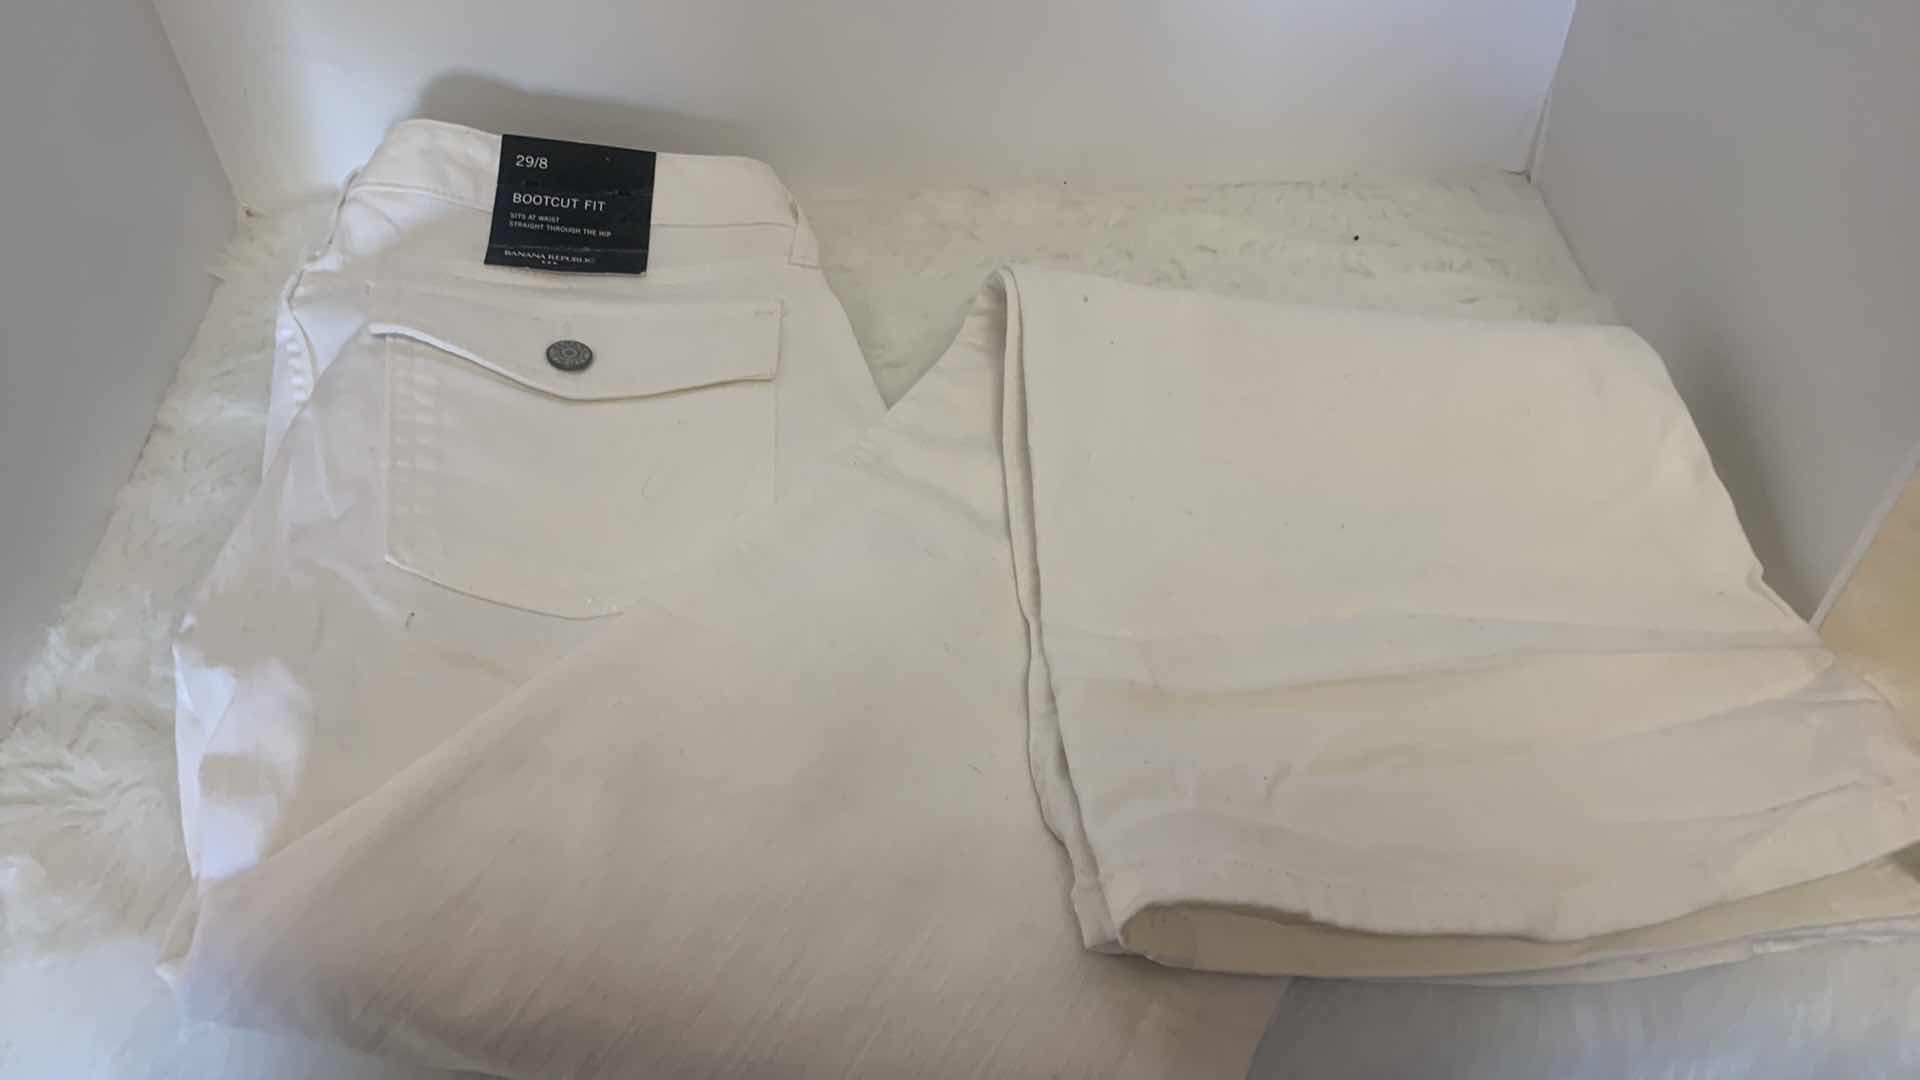 Photo 2 of WOMENS CLOTHING, BANANA REPUBLIC NEW WITH TAGS SIZE 29/8 WHITE BOOTCUT FIT JEANS